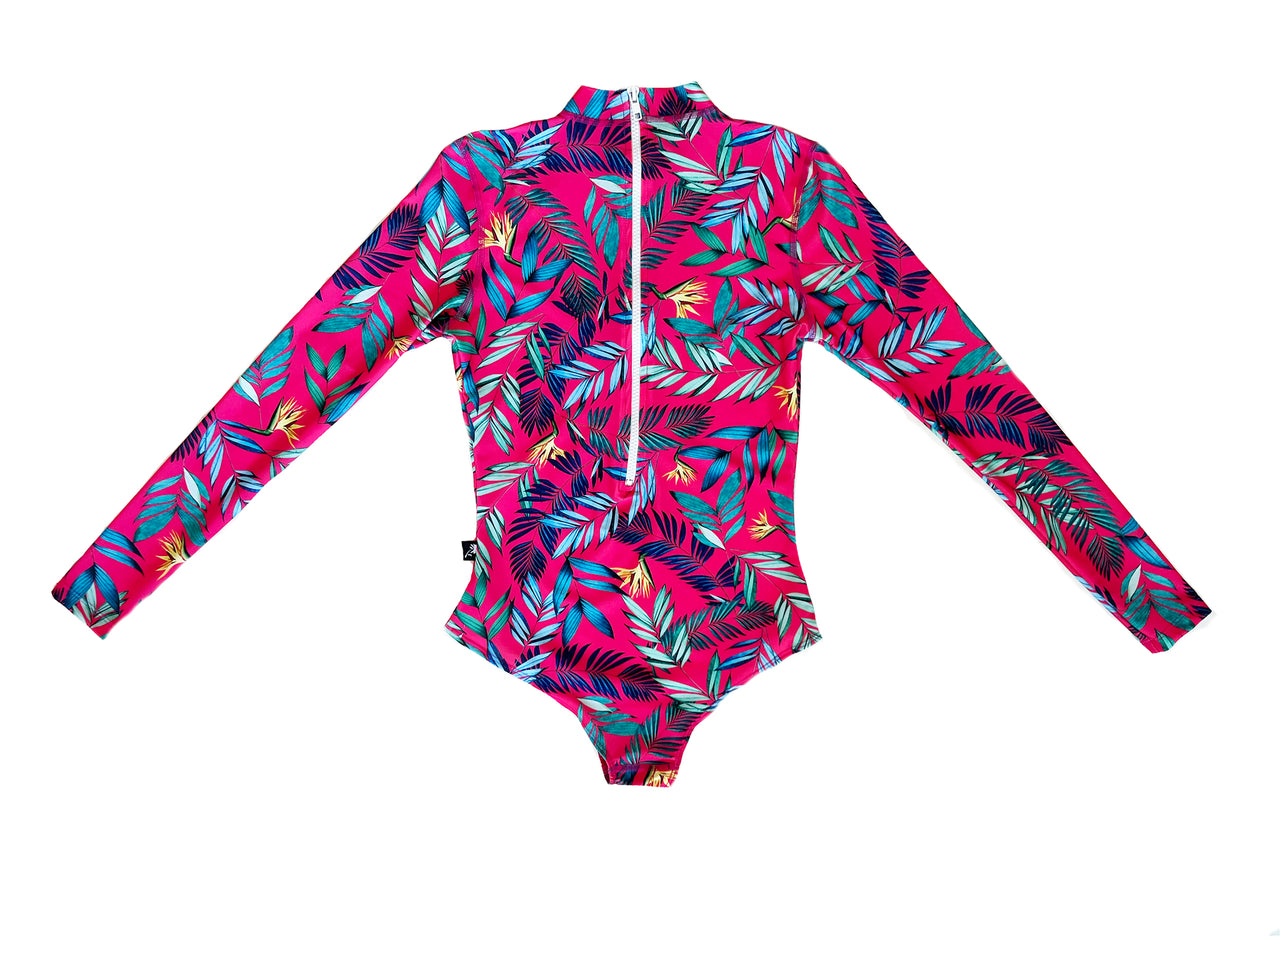 Women's One-Piece SHRED Suit